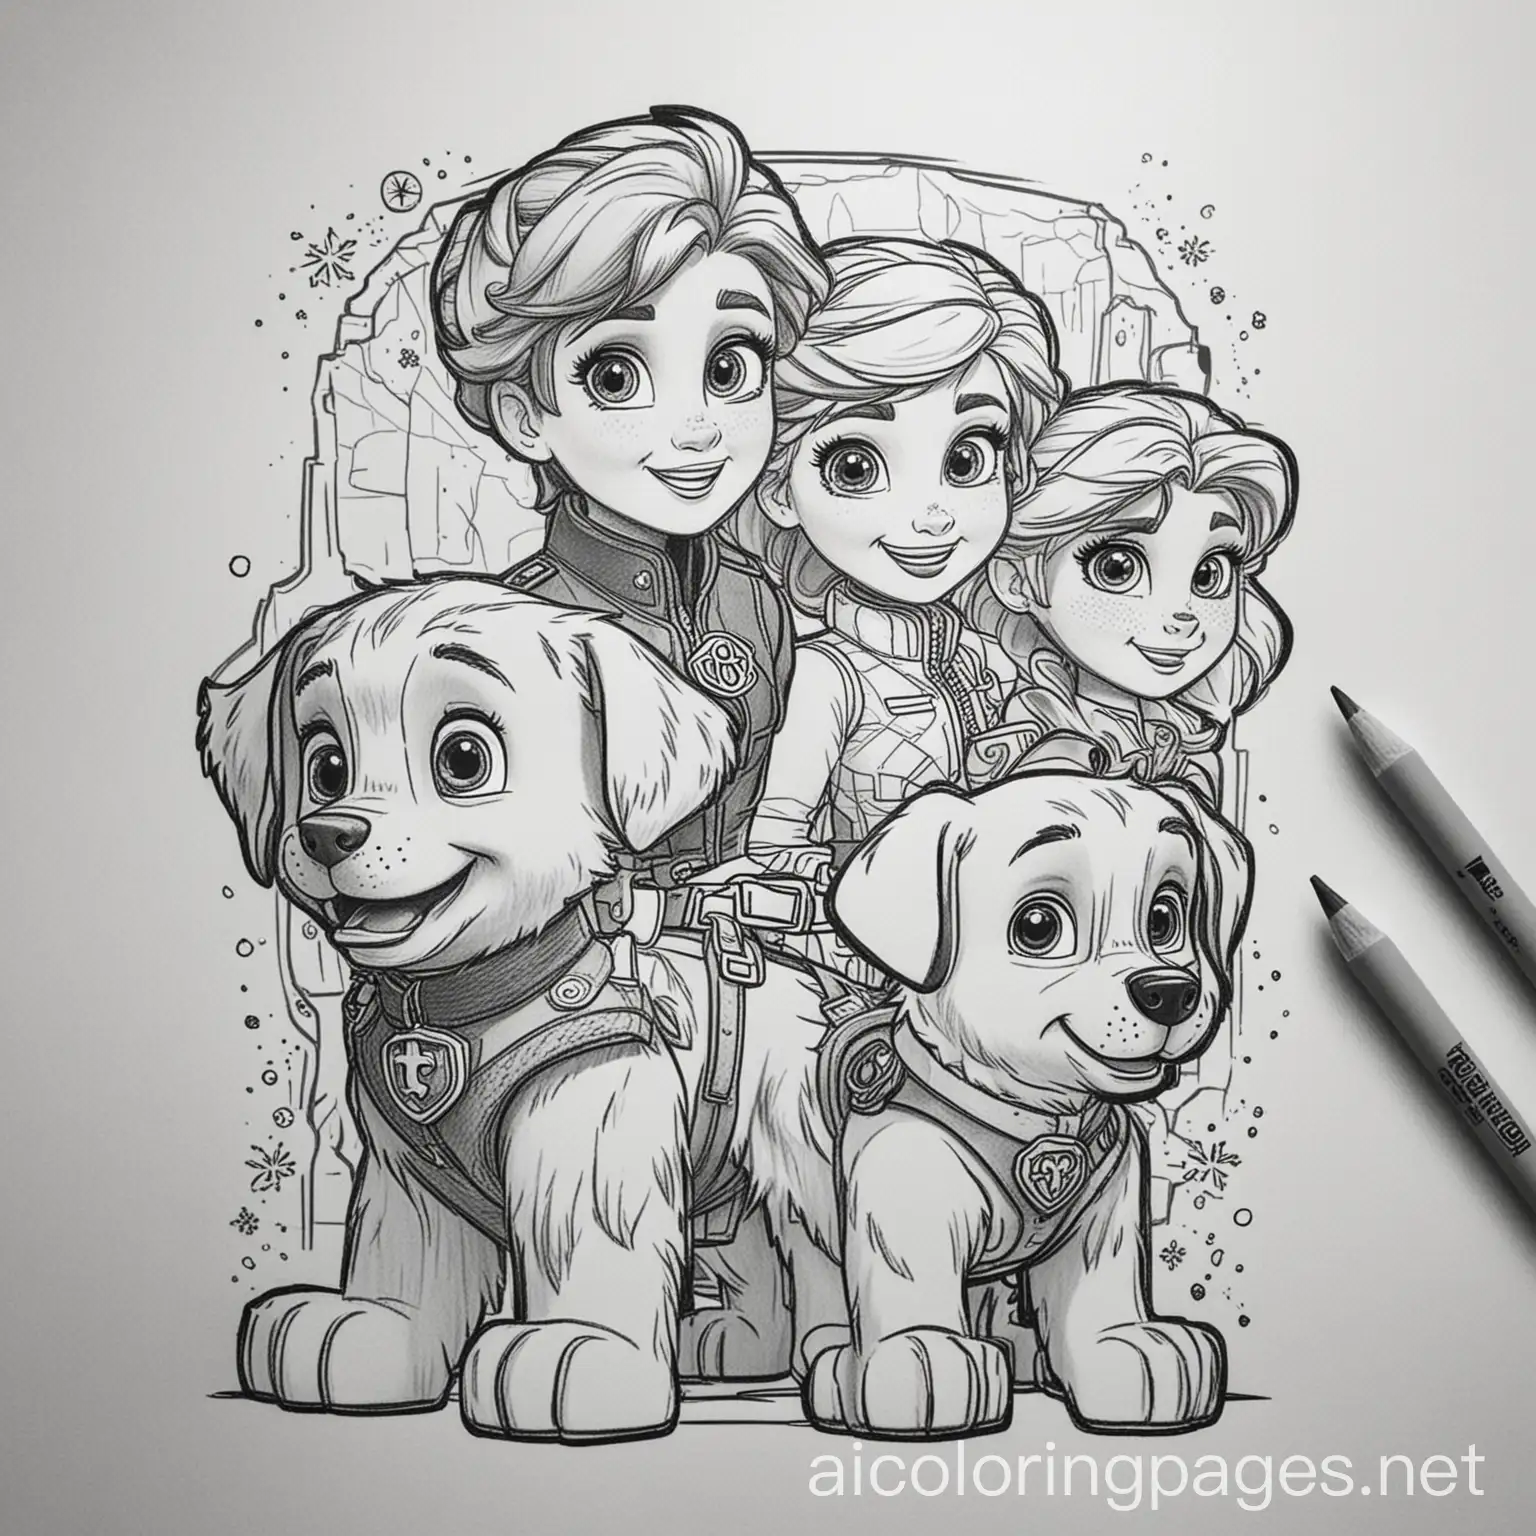 Frozen and Paw Patrol together, Coloring Page, black and white, line art, white background, Simplicity, Ample White Space. The background of the coloring page is plain white to make it easy for young children to color within the lines. The outlines of all the subjects are easy to distinguish, making it simple for kids to color without too much difficulty